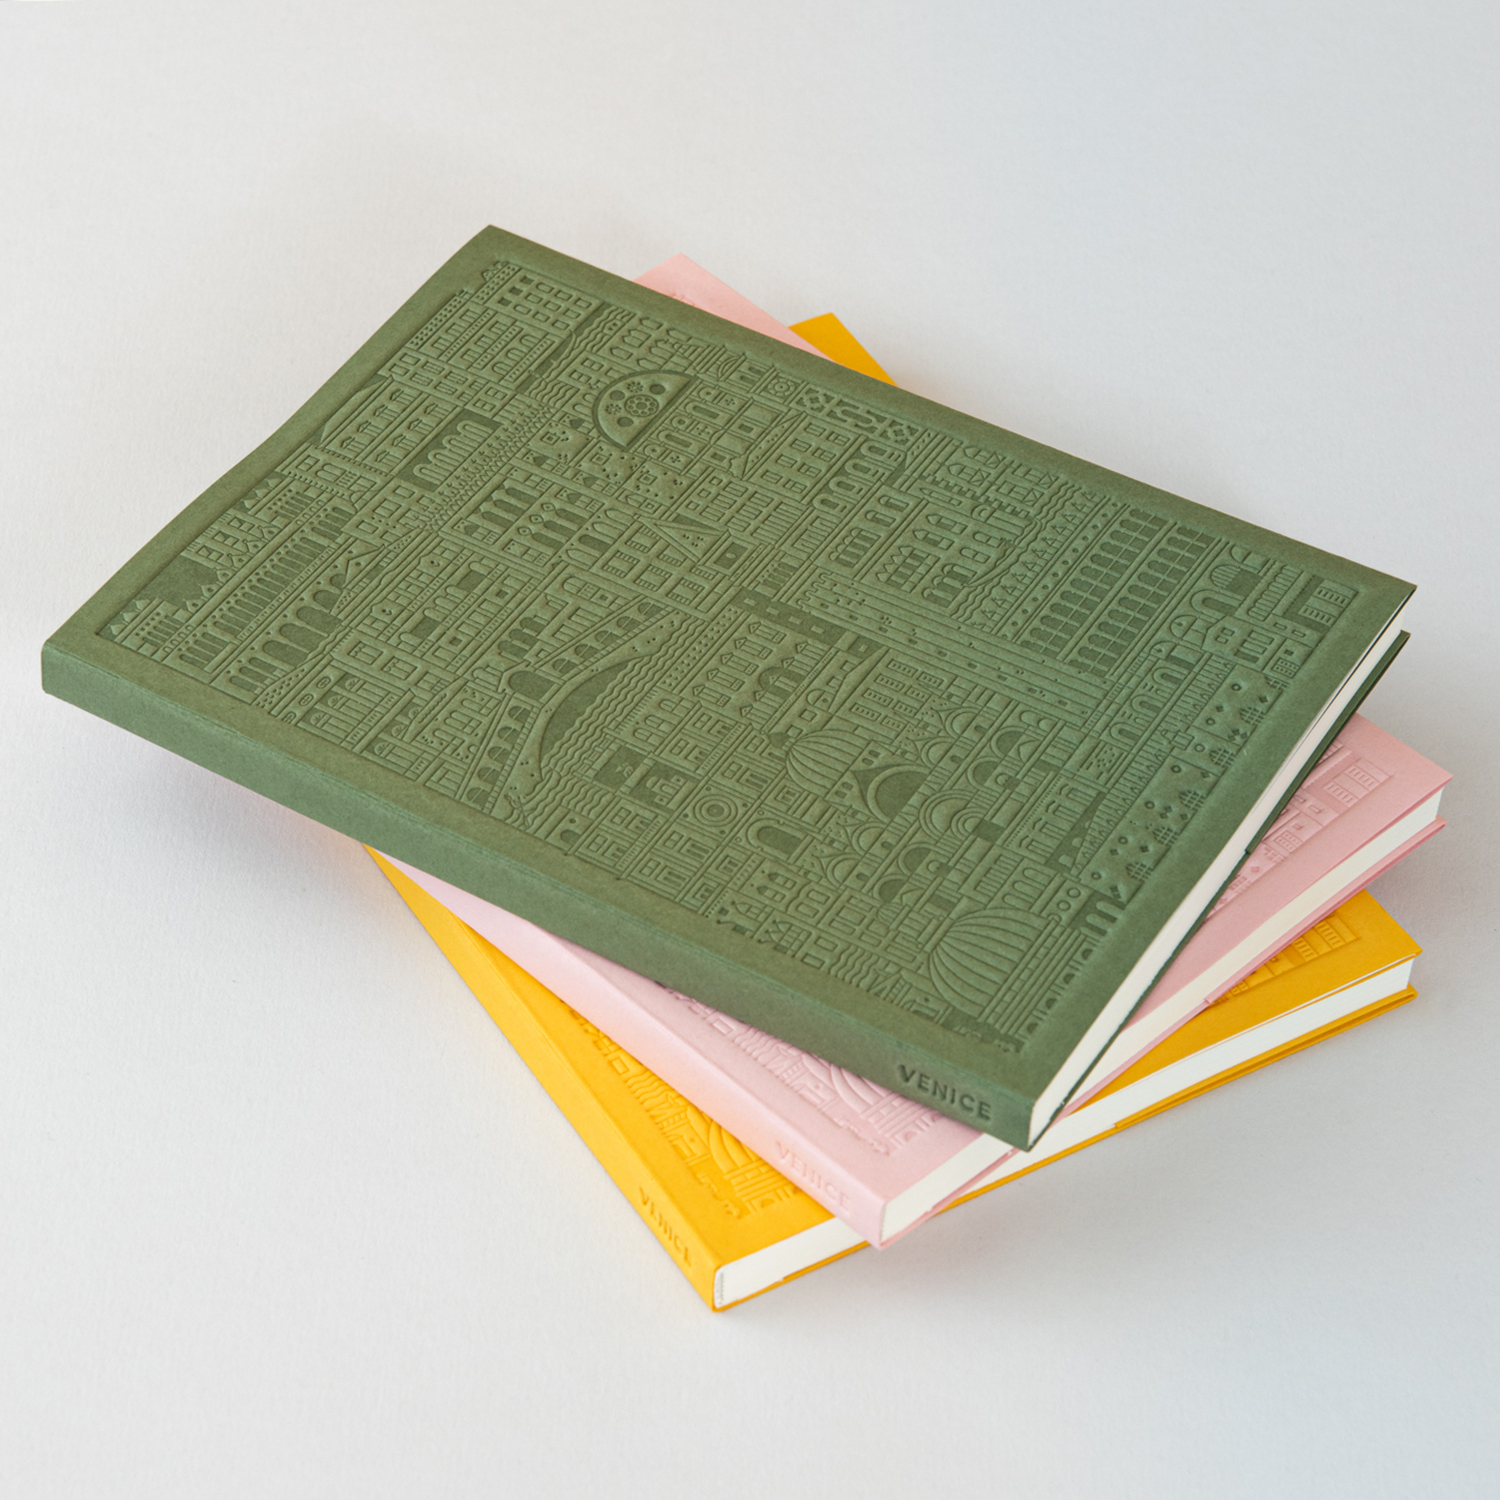 Venice Notebook Stack by The City Works